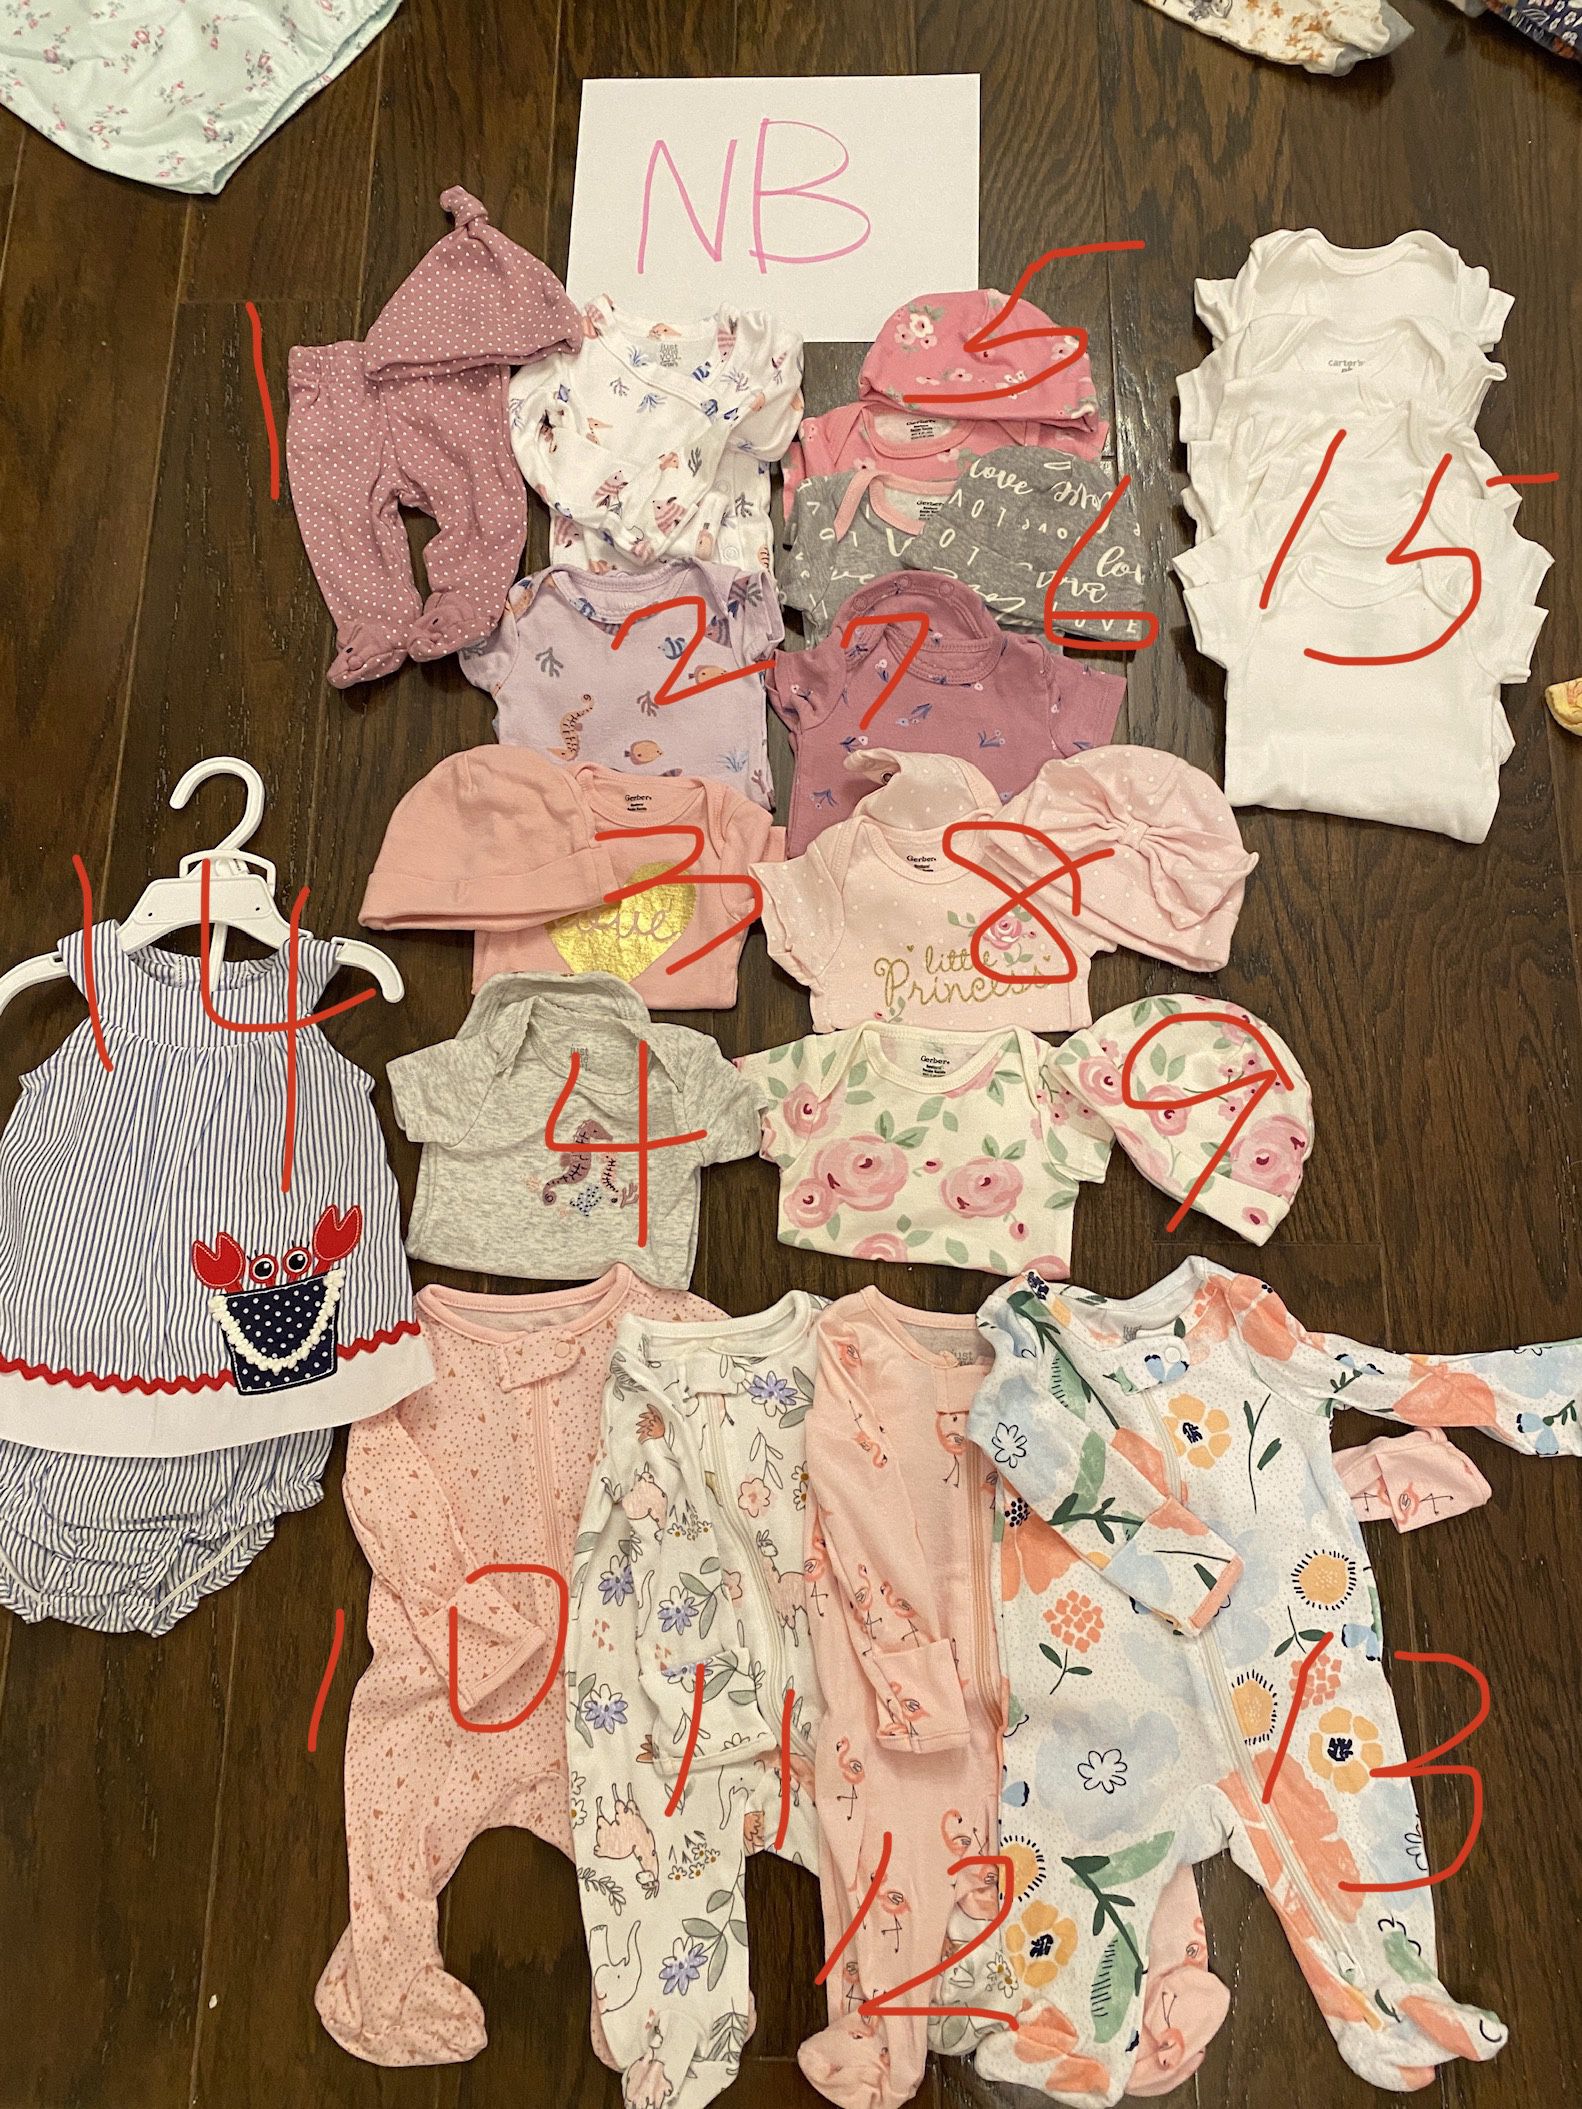 baby Cloth ( NB) 15 Pieces-$10, Each One $1